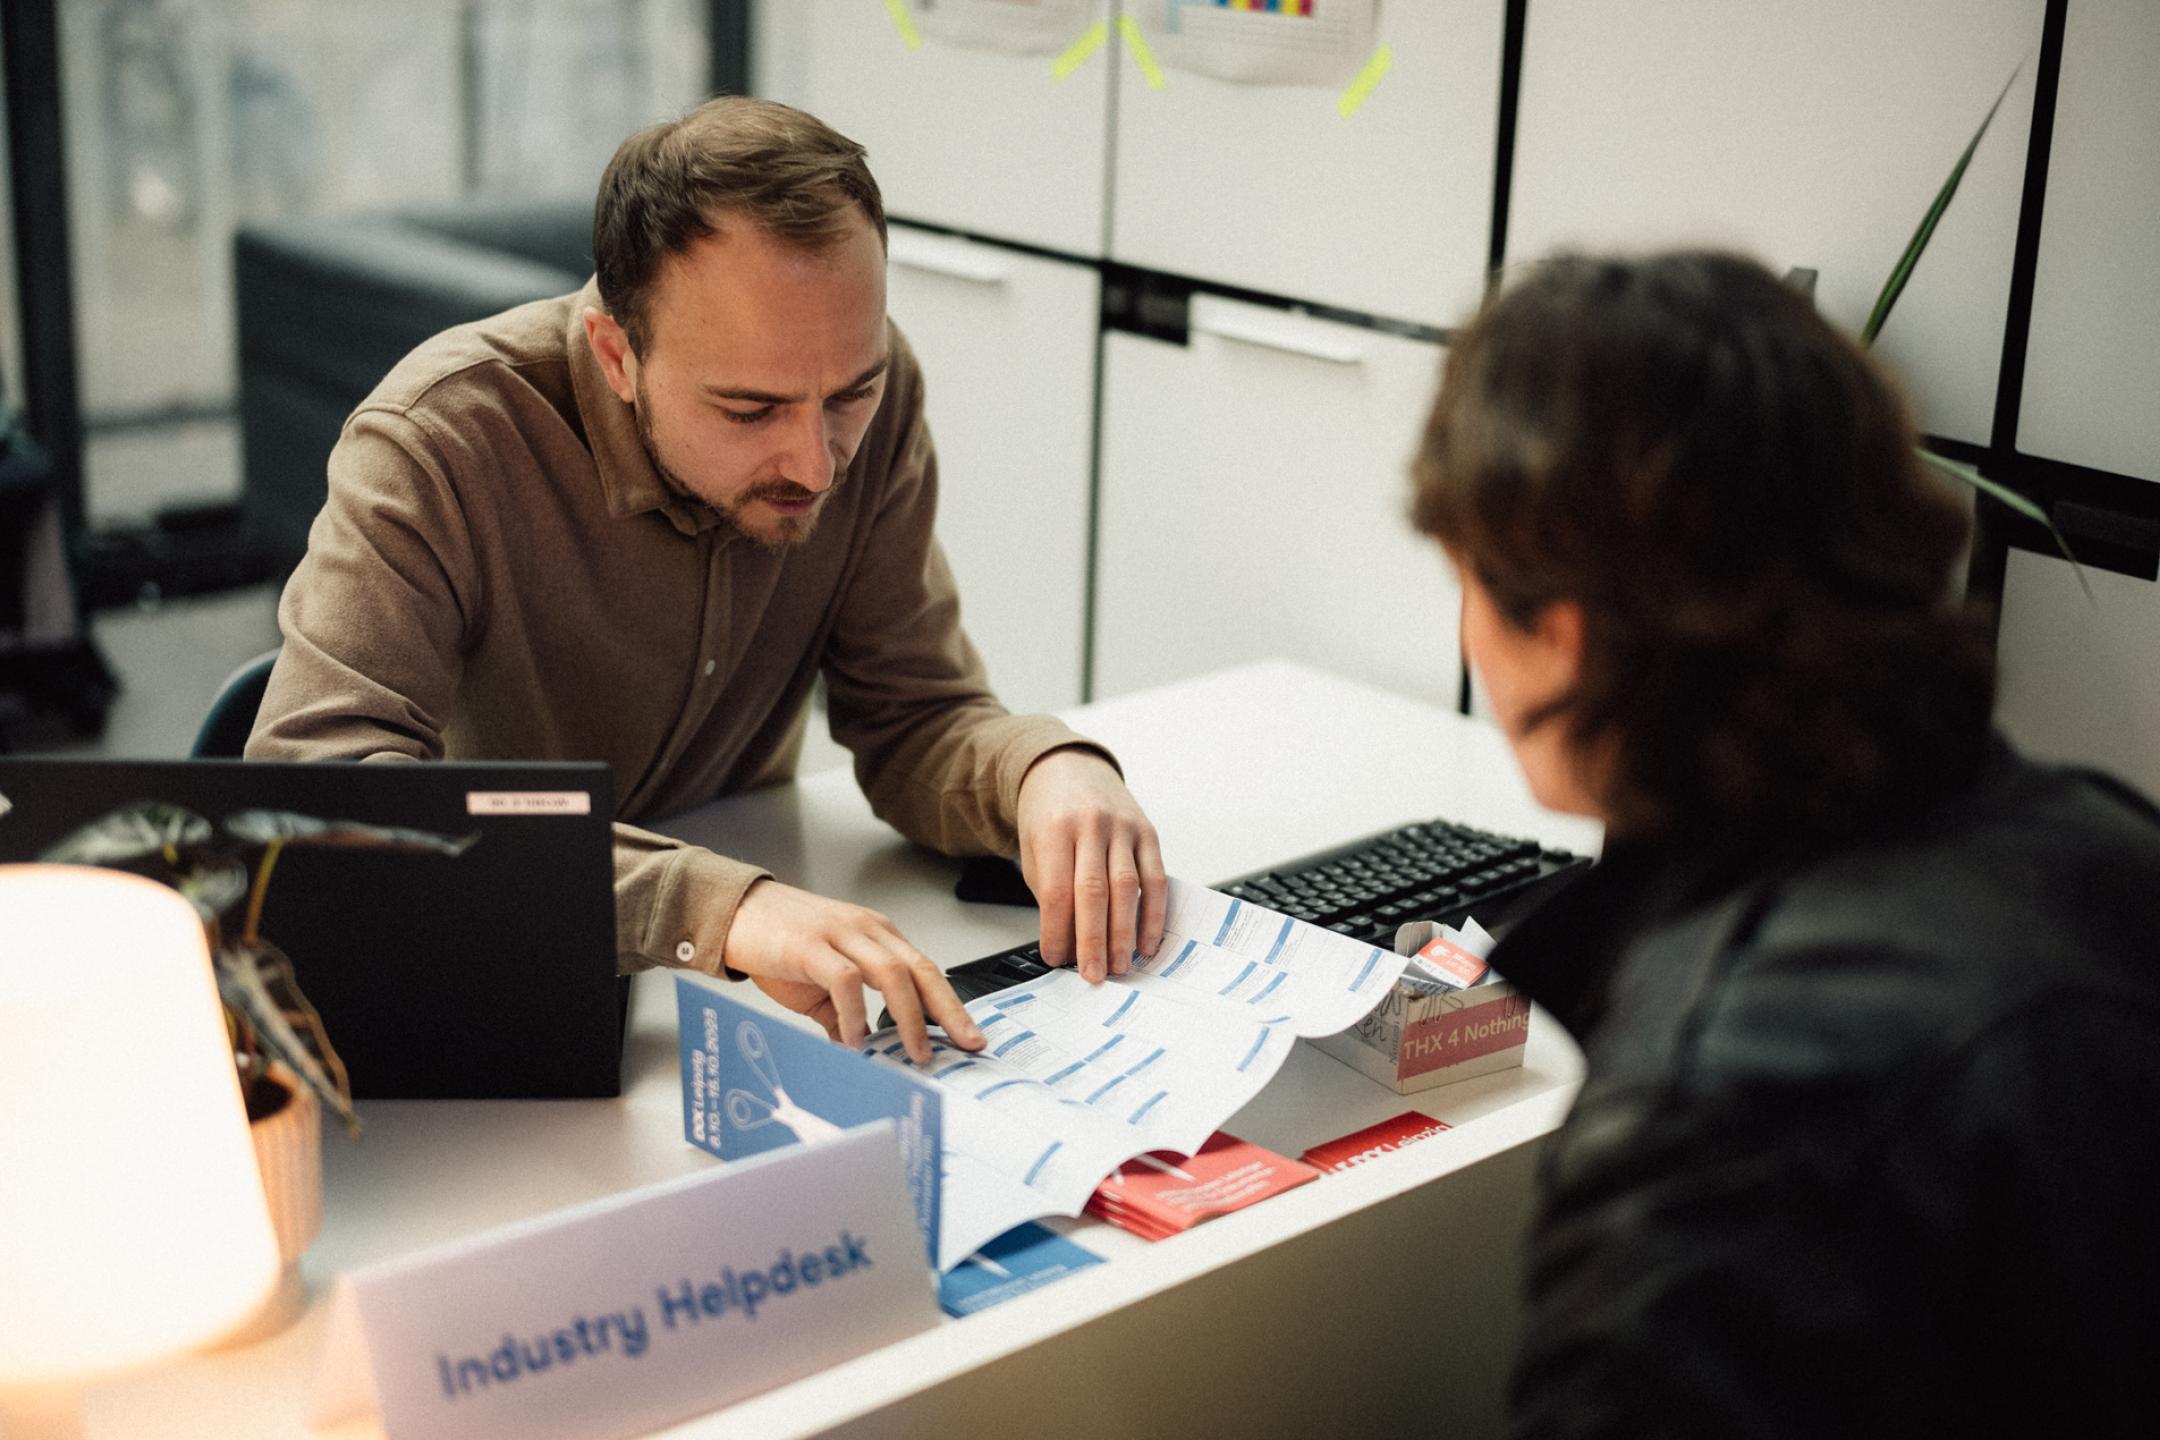 Two persons sit at a desk, looking at a leporello. On the desk a sign with "Industry Helpdesk".